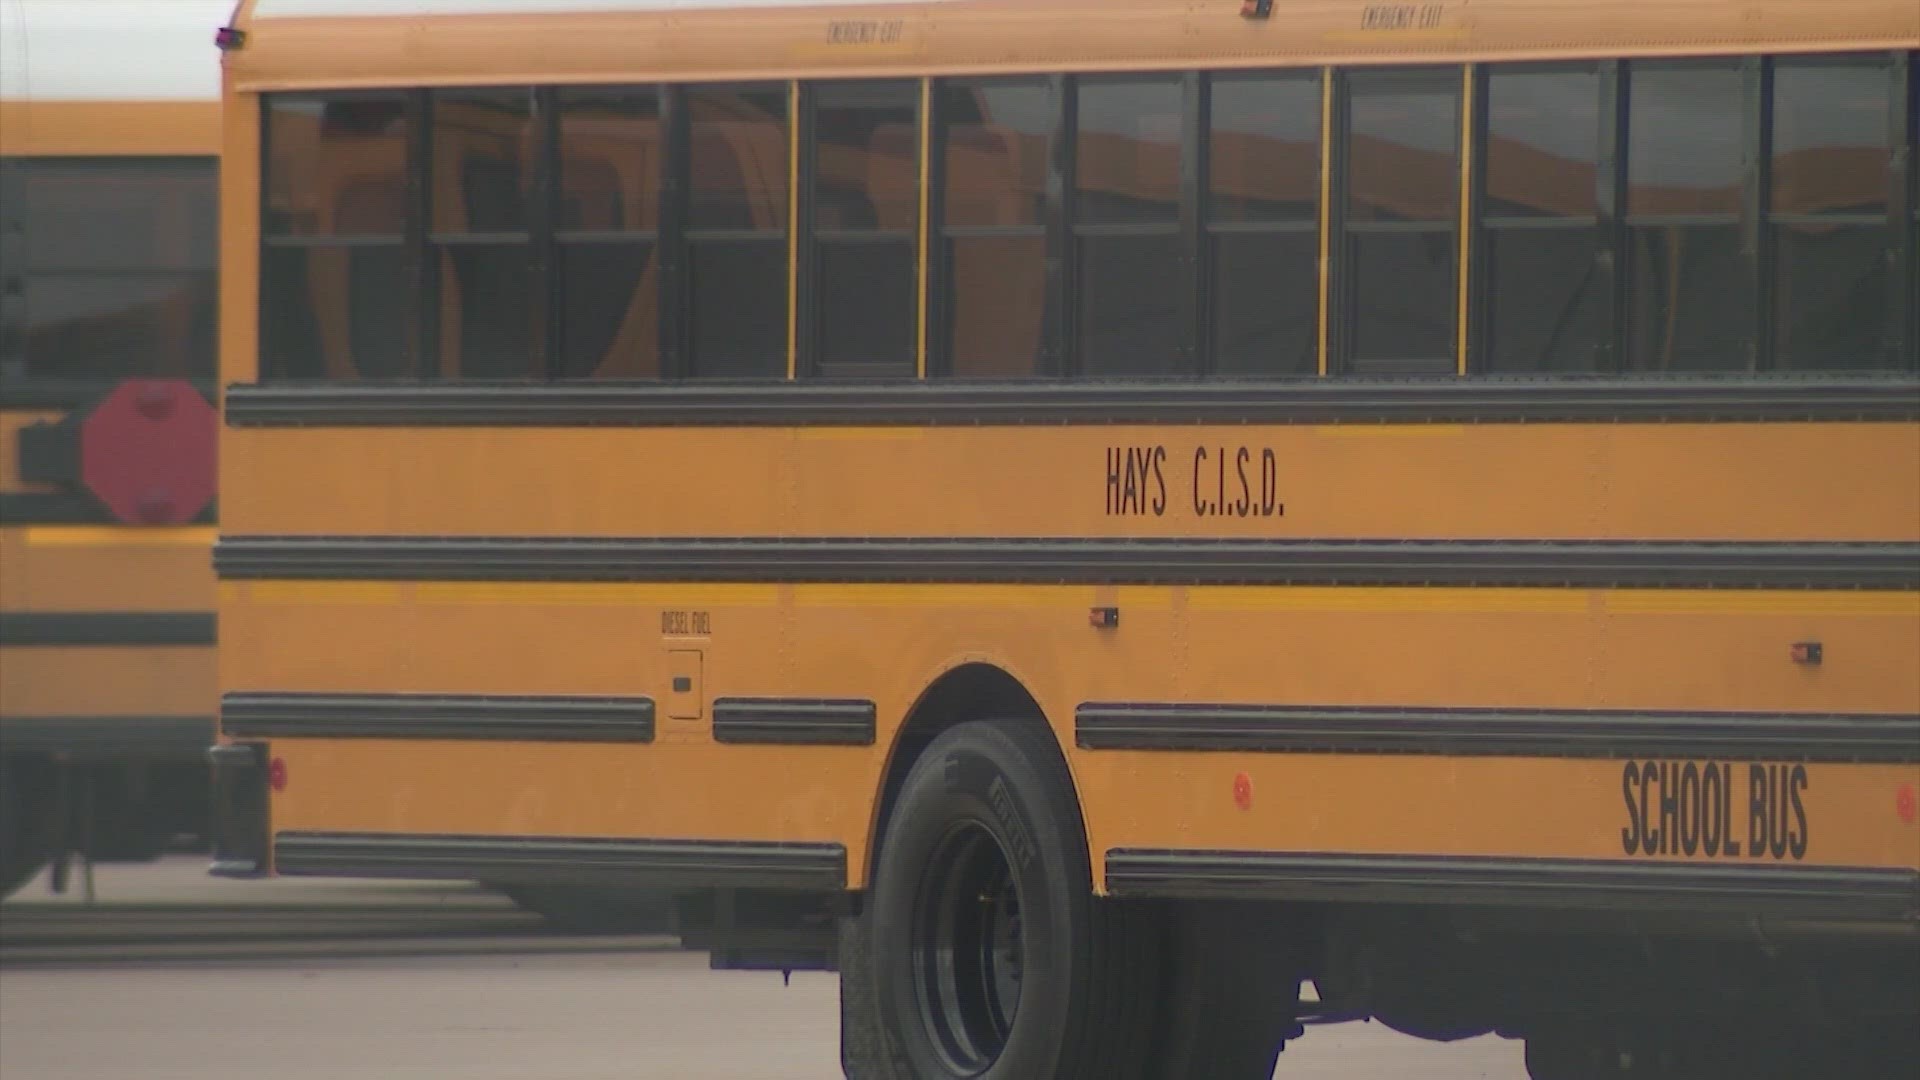 This plan comes less than four weeks after the deadly school bus crash in Bastrop County that killed a 5-year-old boy and a 33-year-old man.